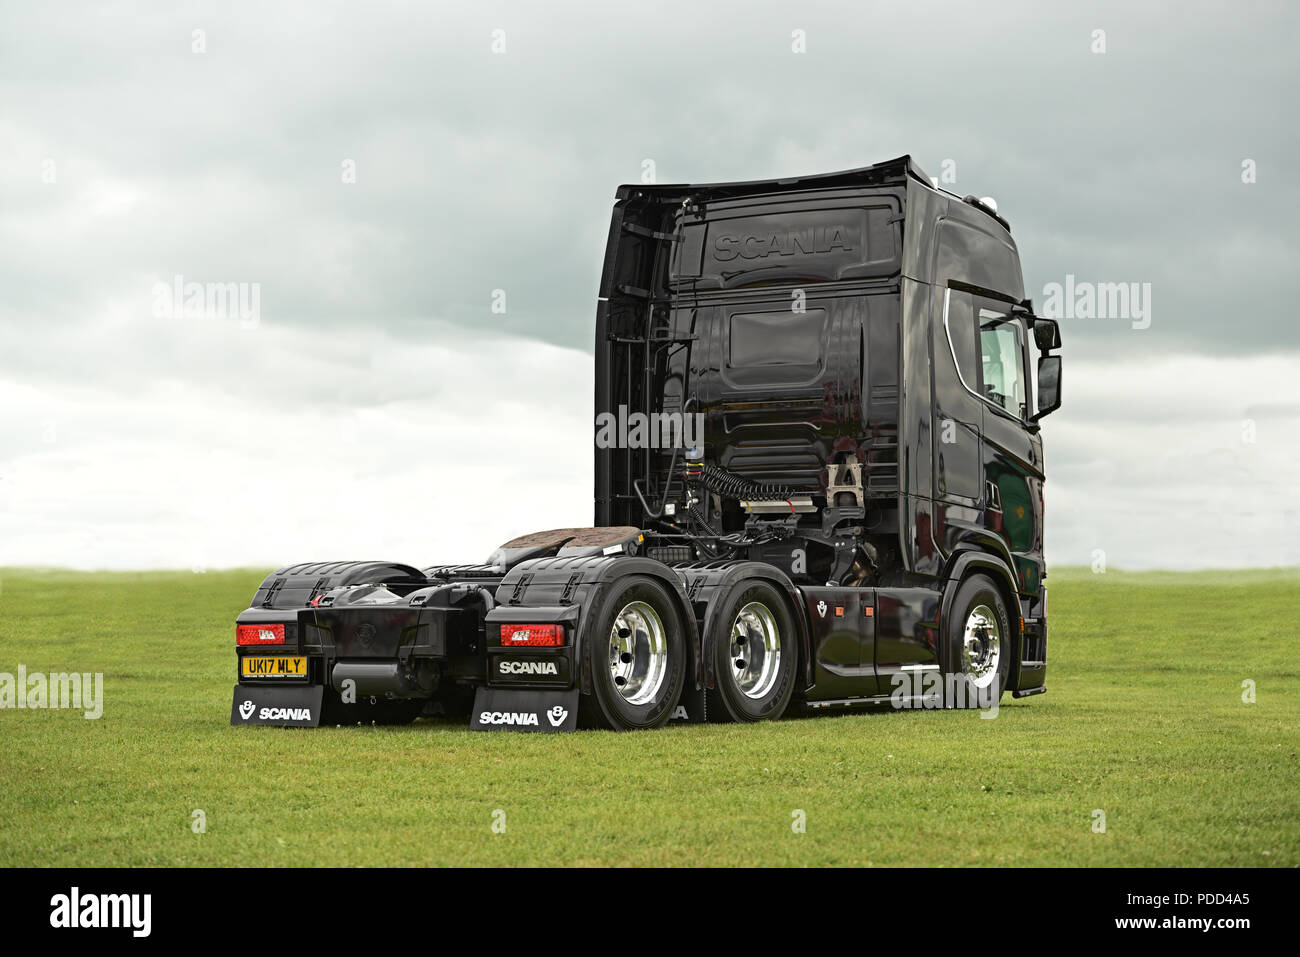 https://c8.alamy.com/comp/PDD4A5/rear-view-of-next-generation-scania-s650-v8-standing-on-grass-PDD4A5.jpg